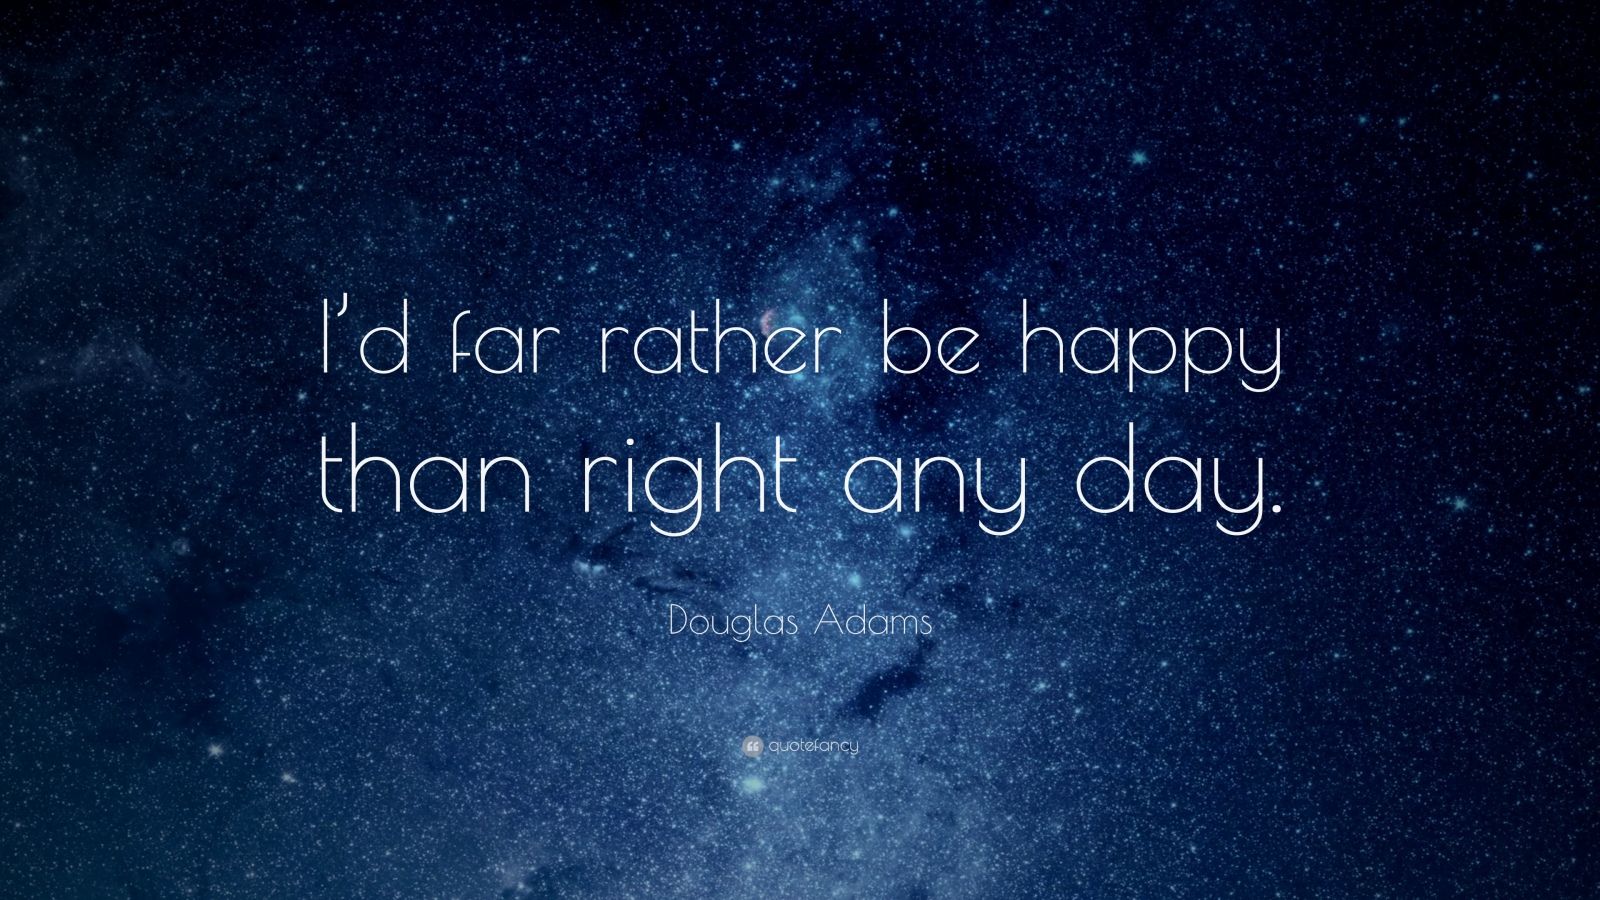 Douglas Adams Quote: “I'd far rather be happy than right any day.”